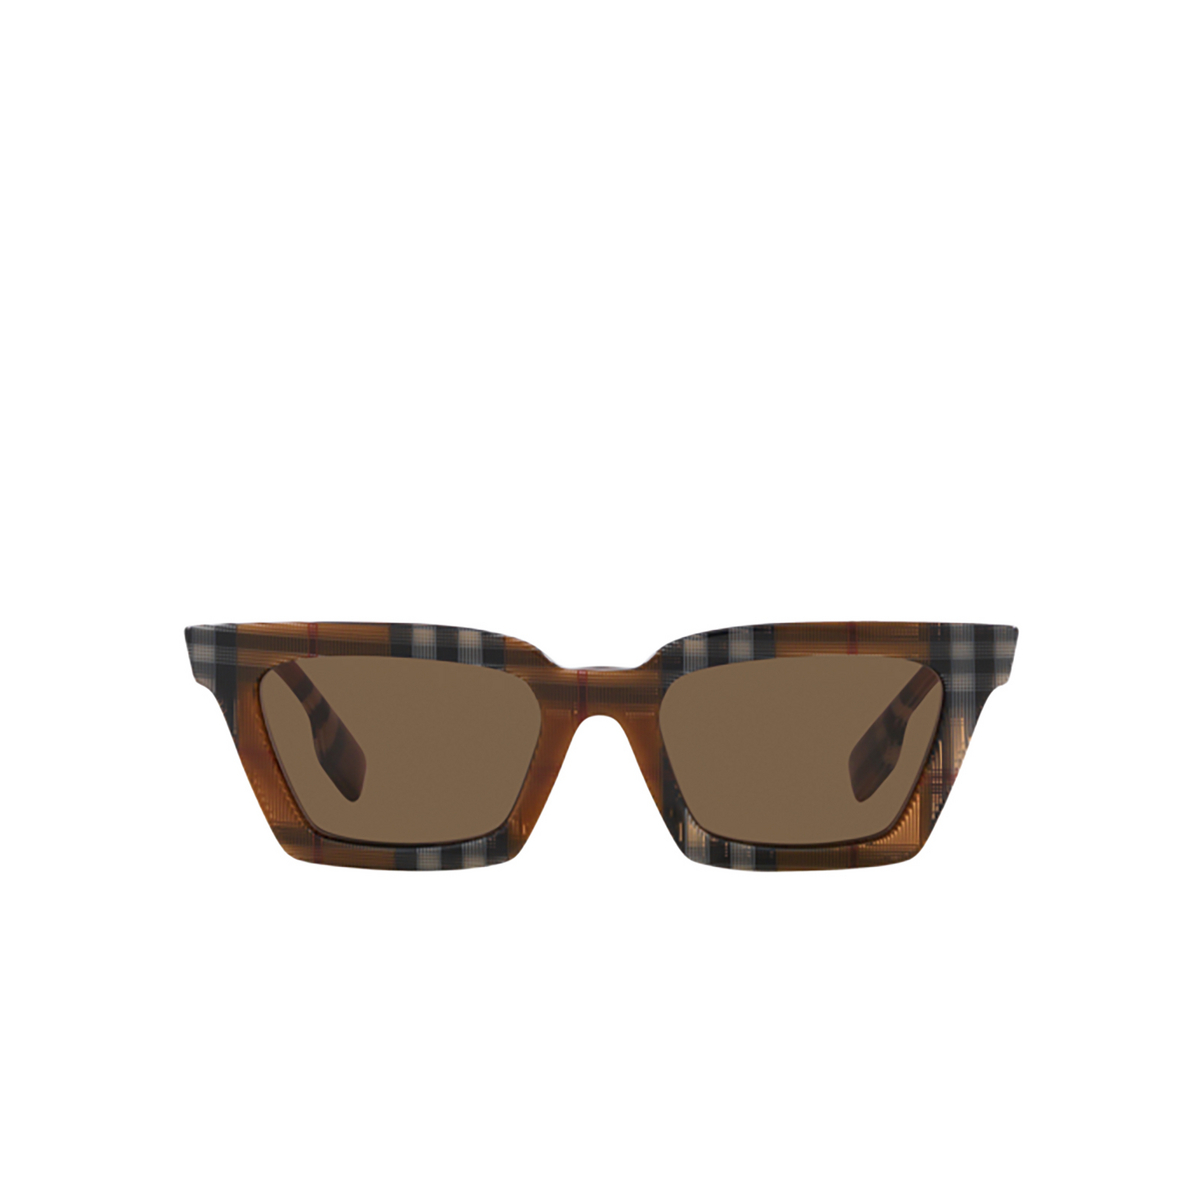 Burberry BRIAR Sunglasses 396673 Check Brown - front view